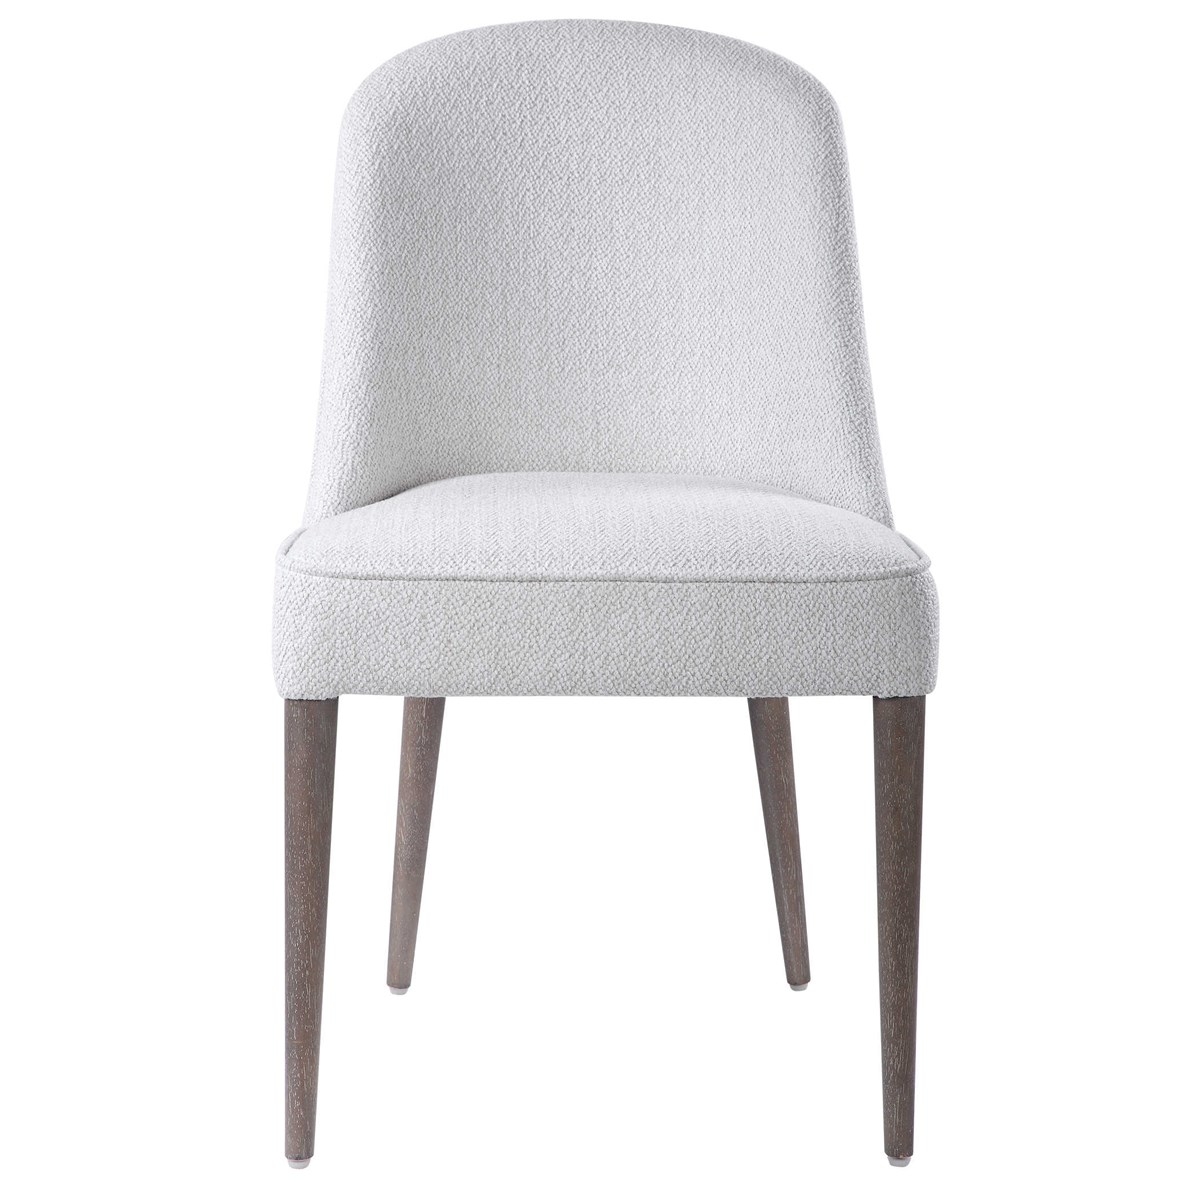 Brie Armless Chair, White, Set Of 2 - Image 0